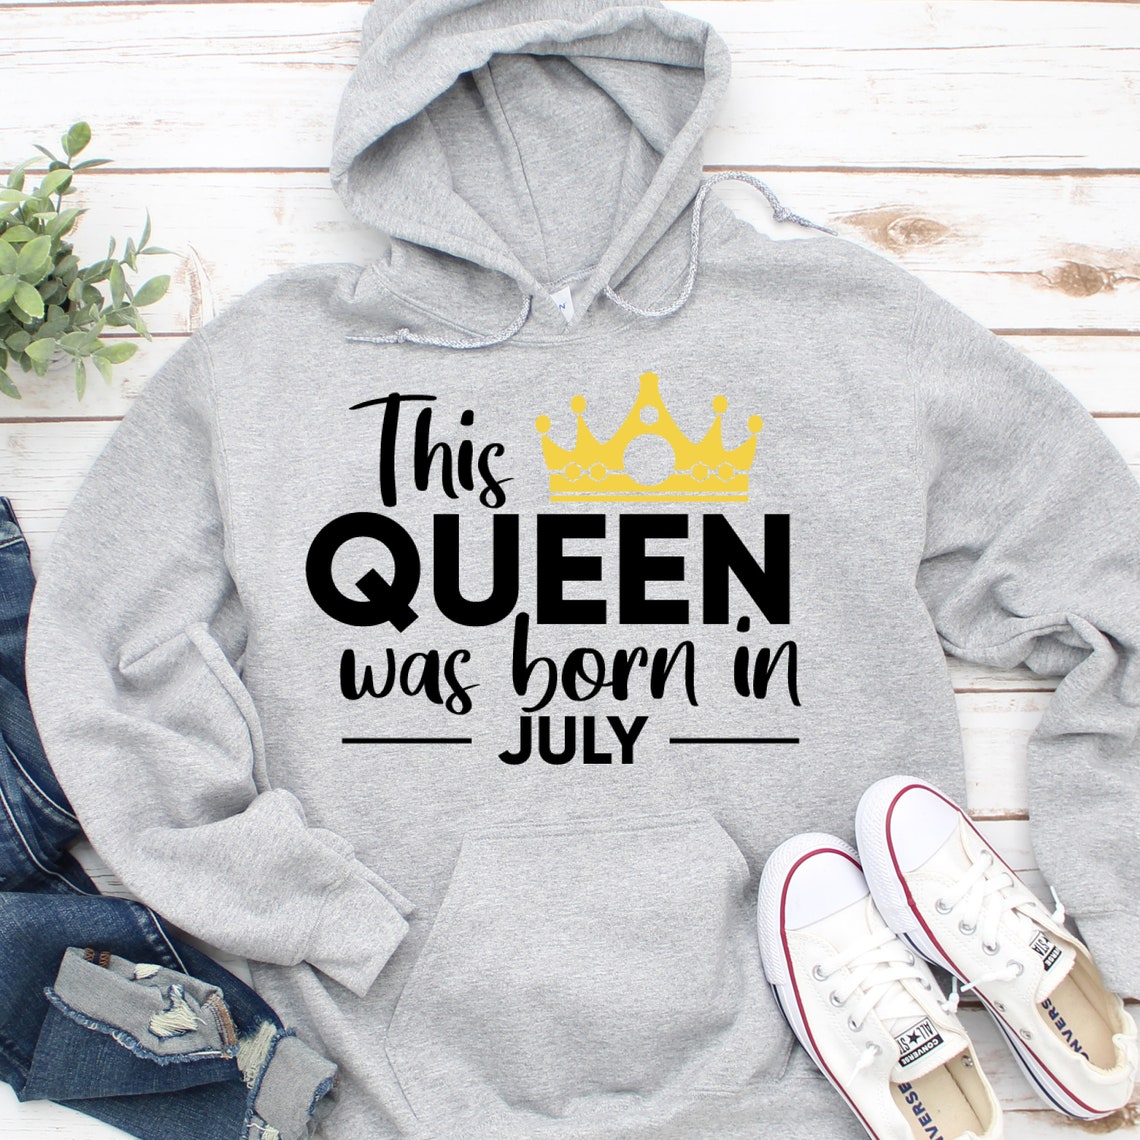 This Queen was born in July